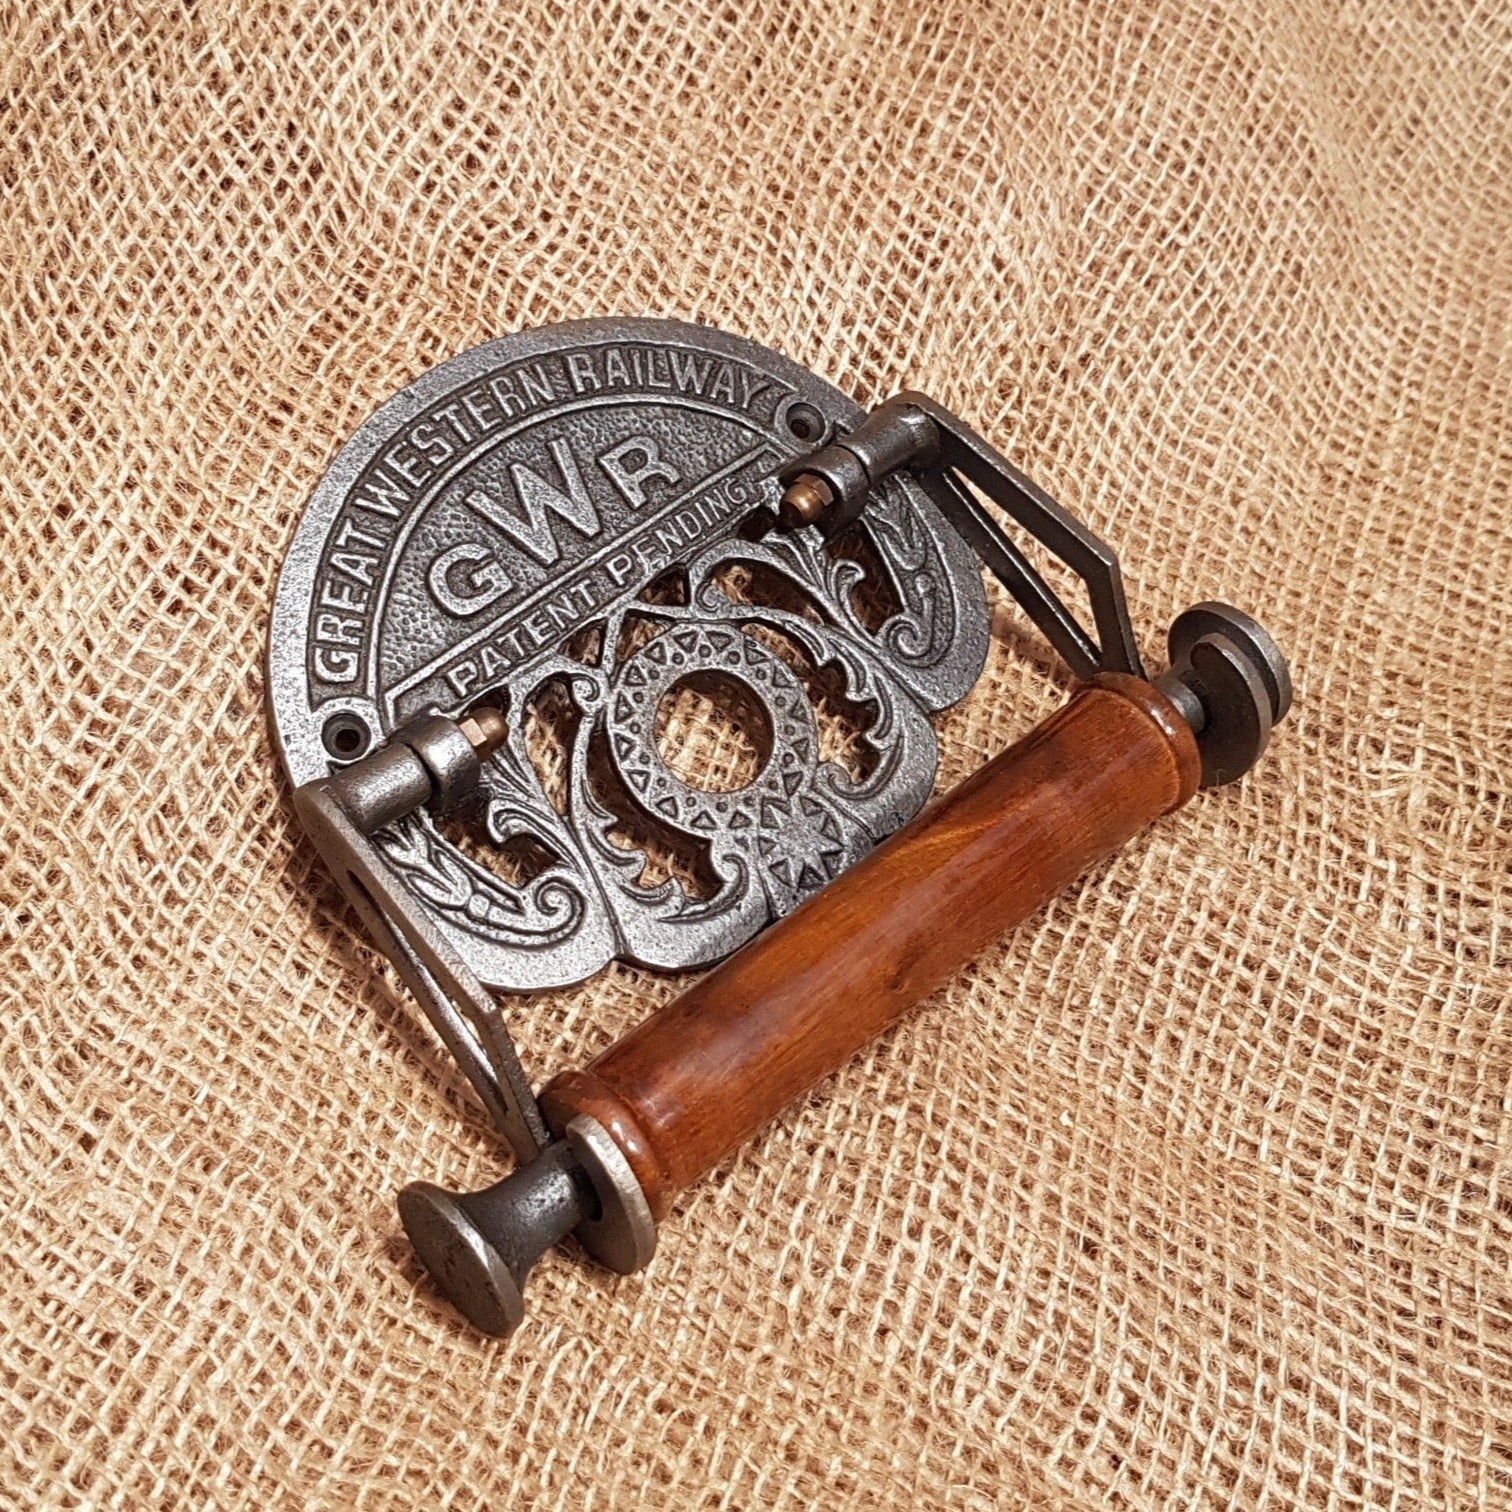 G.W.R. Vintage Toilet Paper Holder - Spearhead Collection - Toilet Paper Holders - Bathroom Decor, Home Decor, Made in England, Toilet Paper Holders